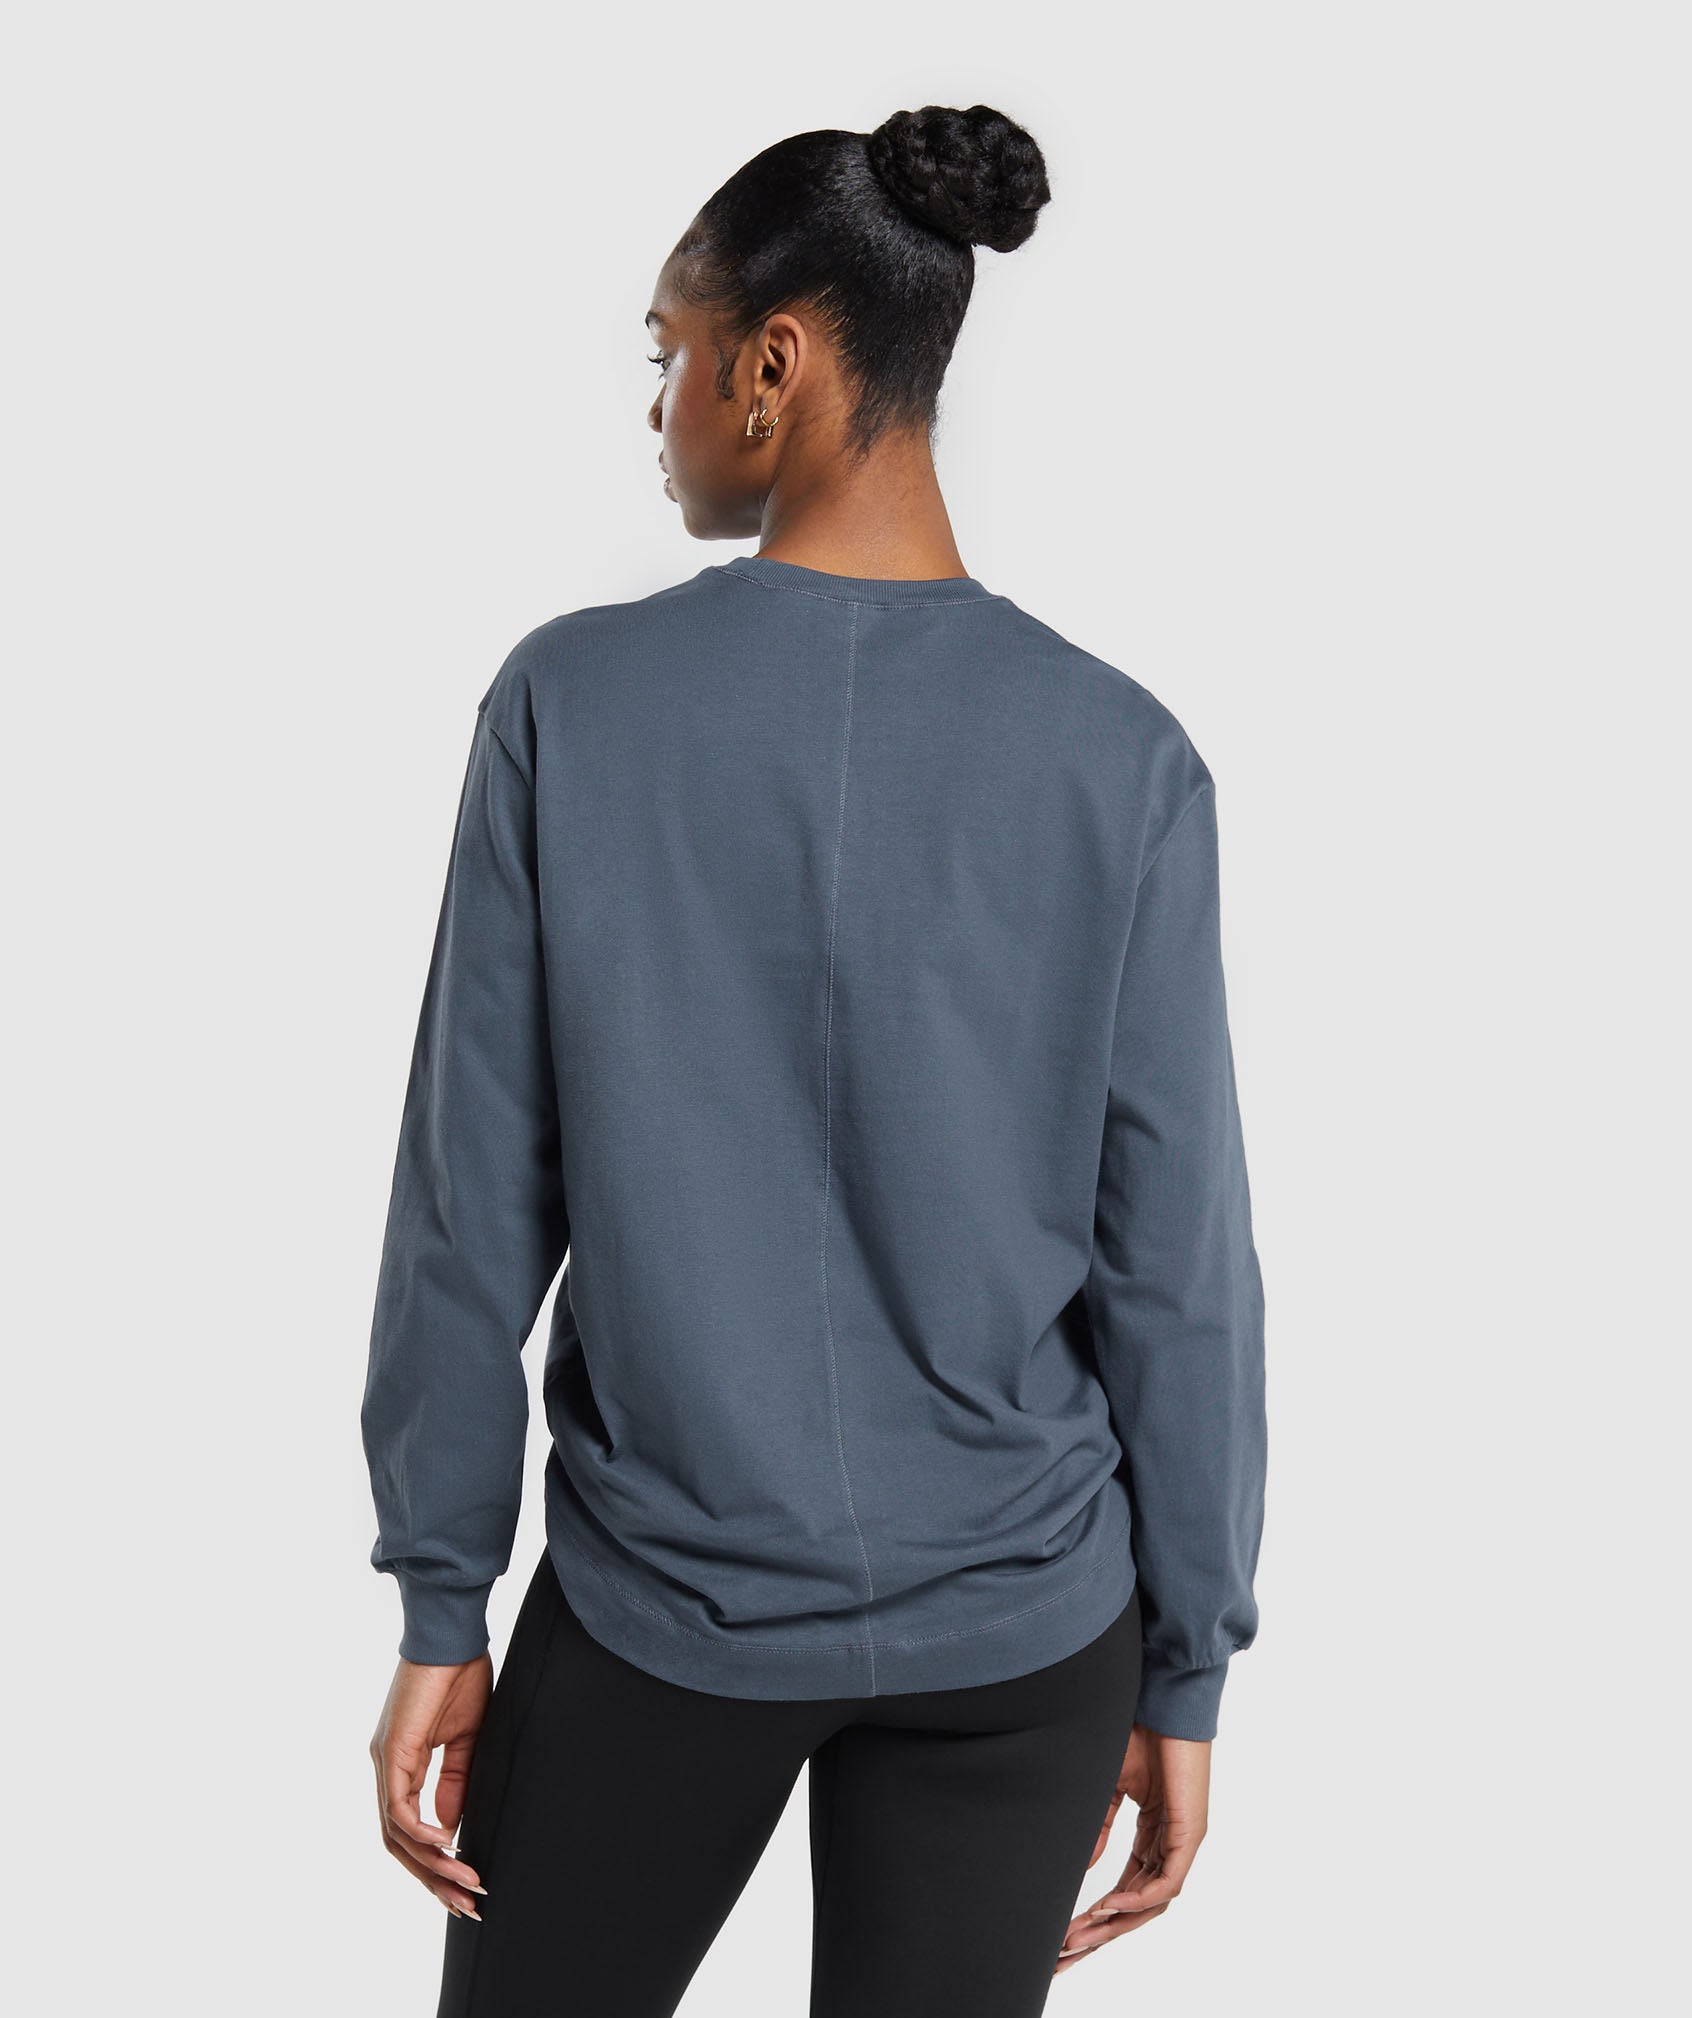 Cotton Oversized Long Sleeve Top